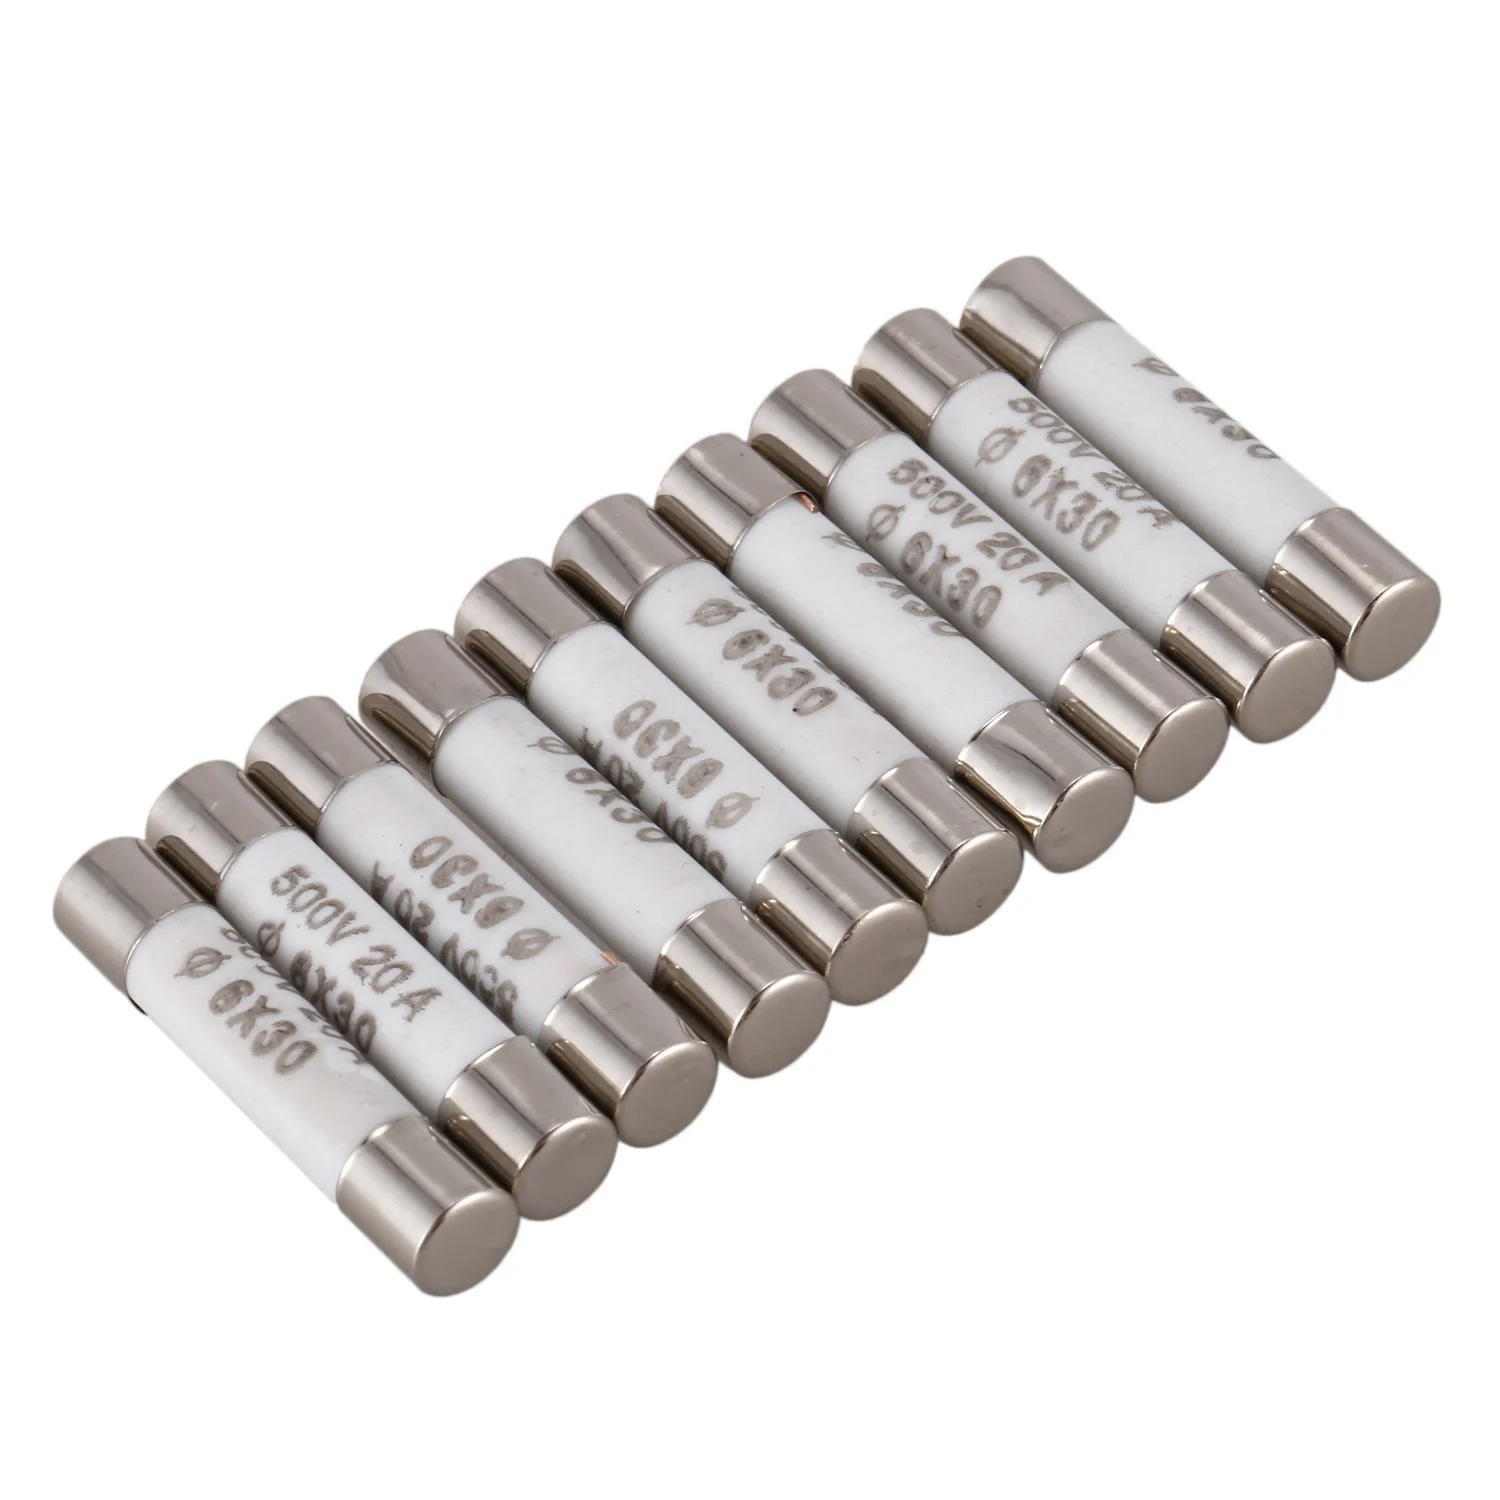 

10 Pieces 6mmx30mm 20A Faset-Blow Ceramic Fuse Link 500V